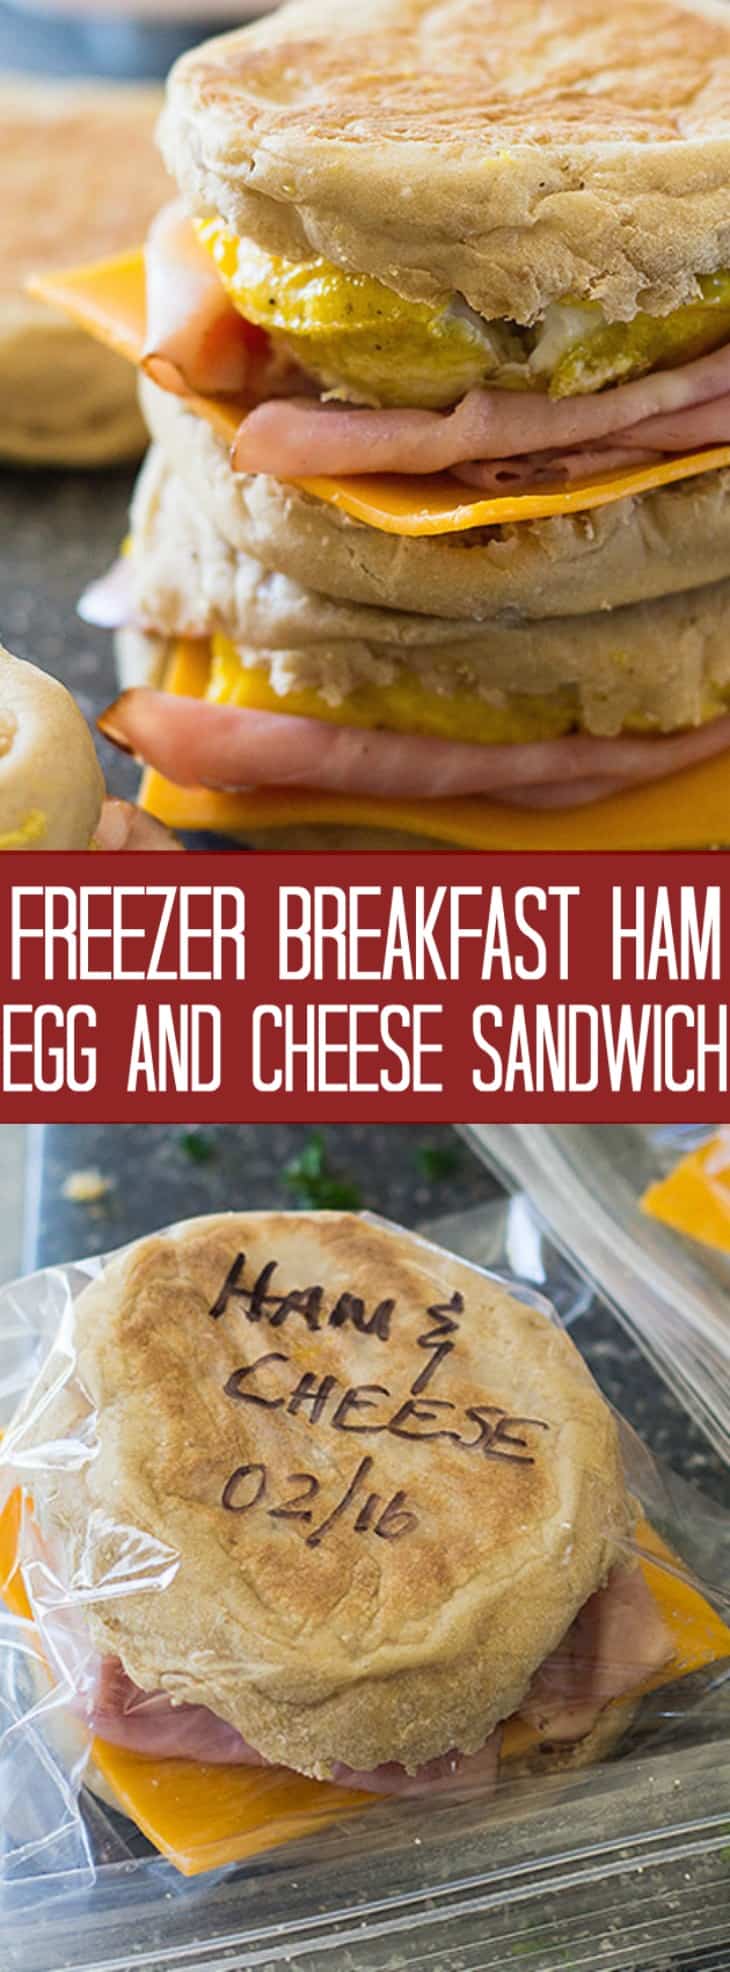 This Freezer Breakfast Ham Egg and Cheese sandwich is a healthier alternative to that Egg McMuffin! They are easy to make and are a great for breakfast on the go! | www.countrysidecravings.com